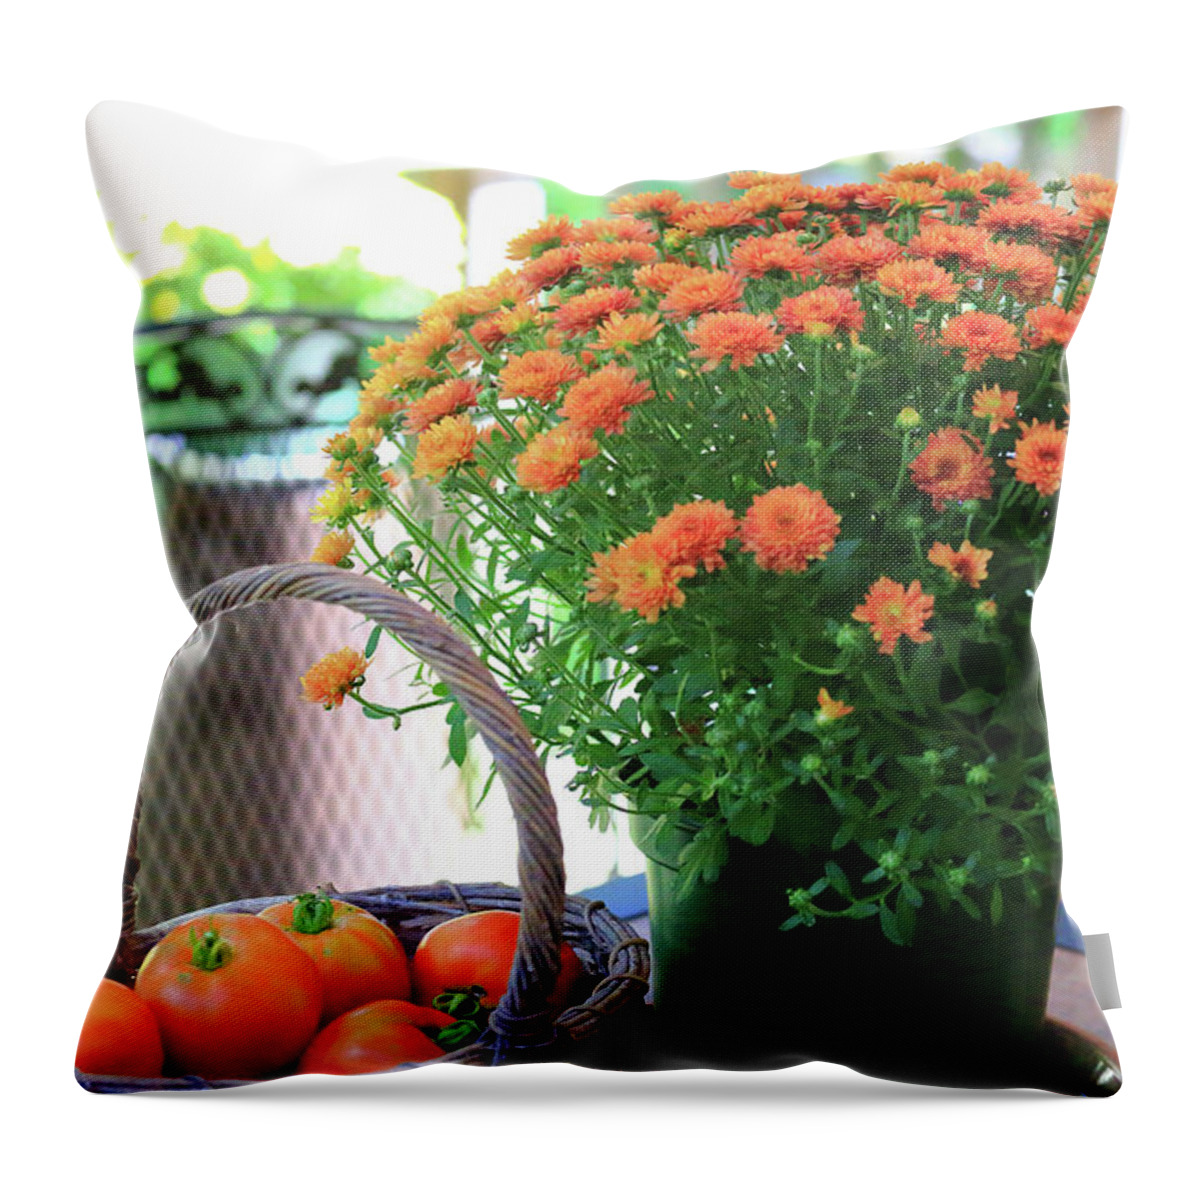 Autumn Harvest Throw Pillow featuring the photograph Autumn Harvest by PJQandFriends Photography